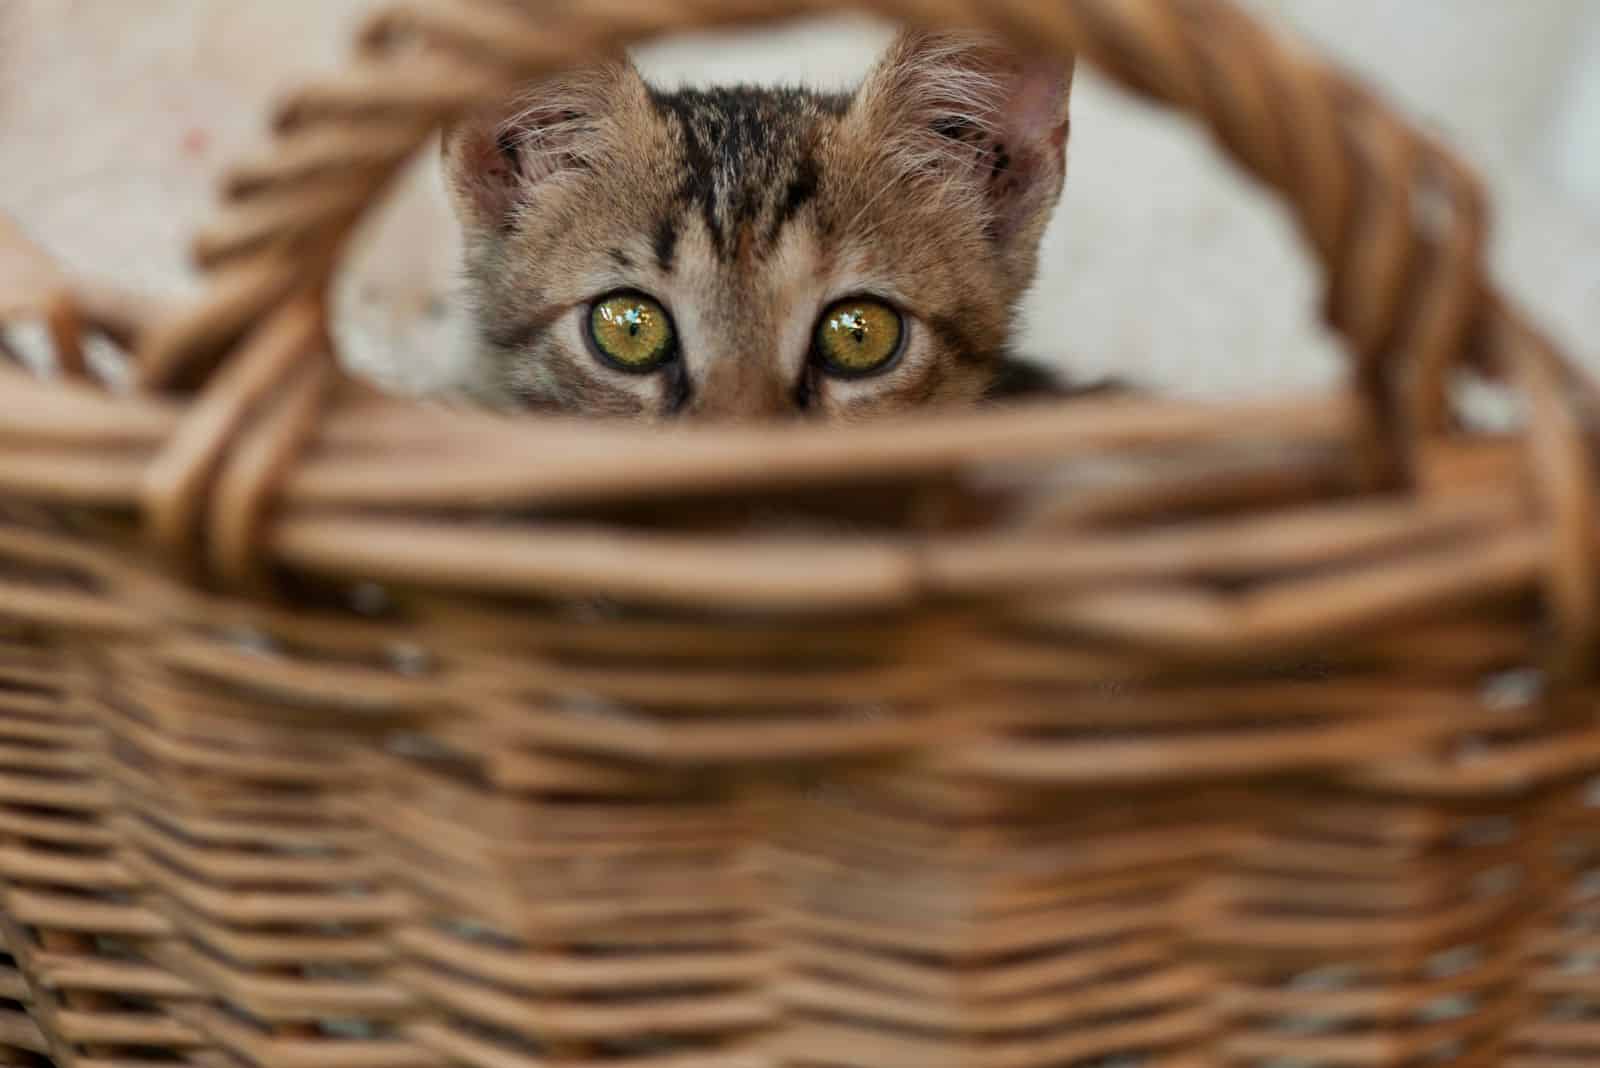 cat's eyes behind a wooden basket